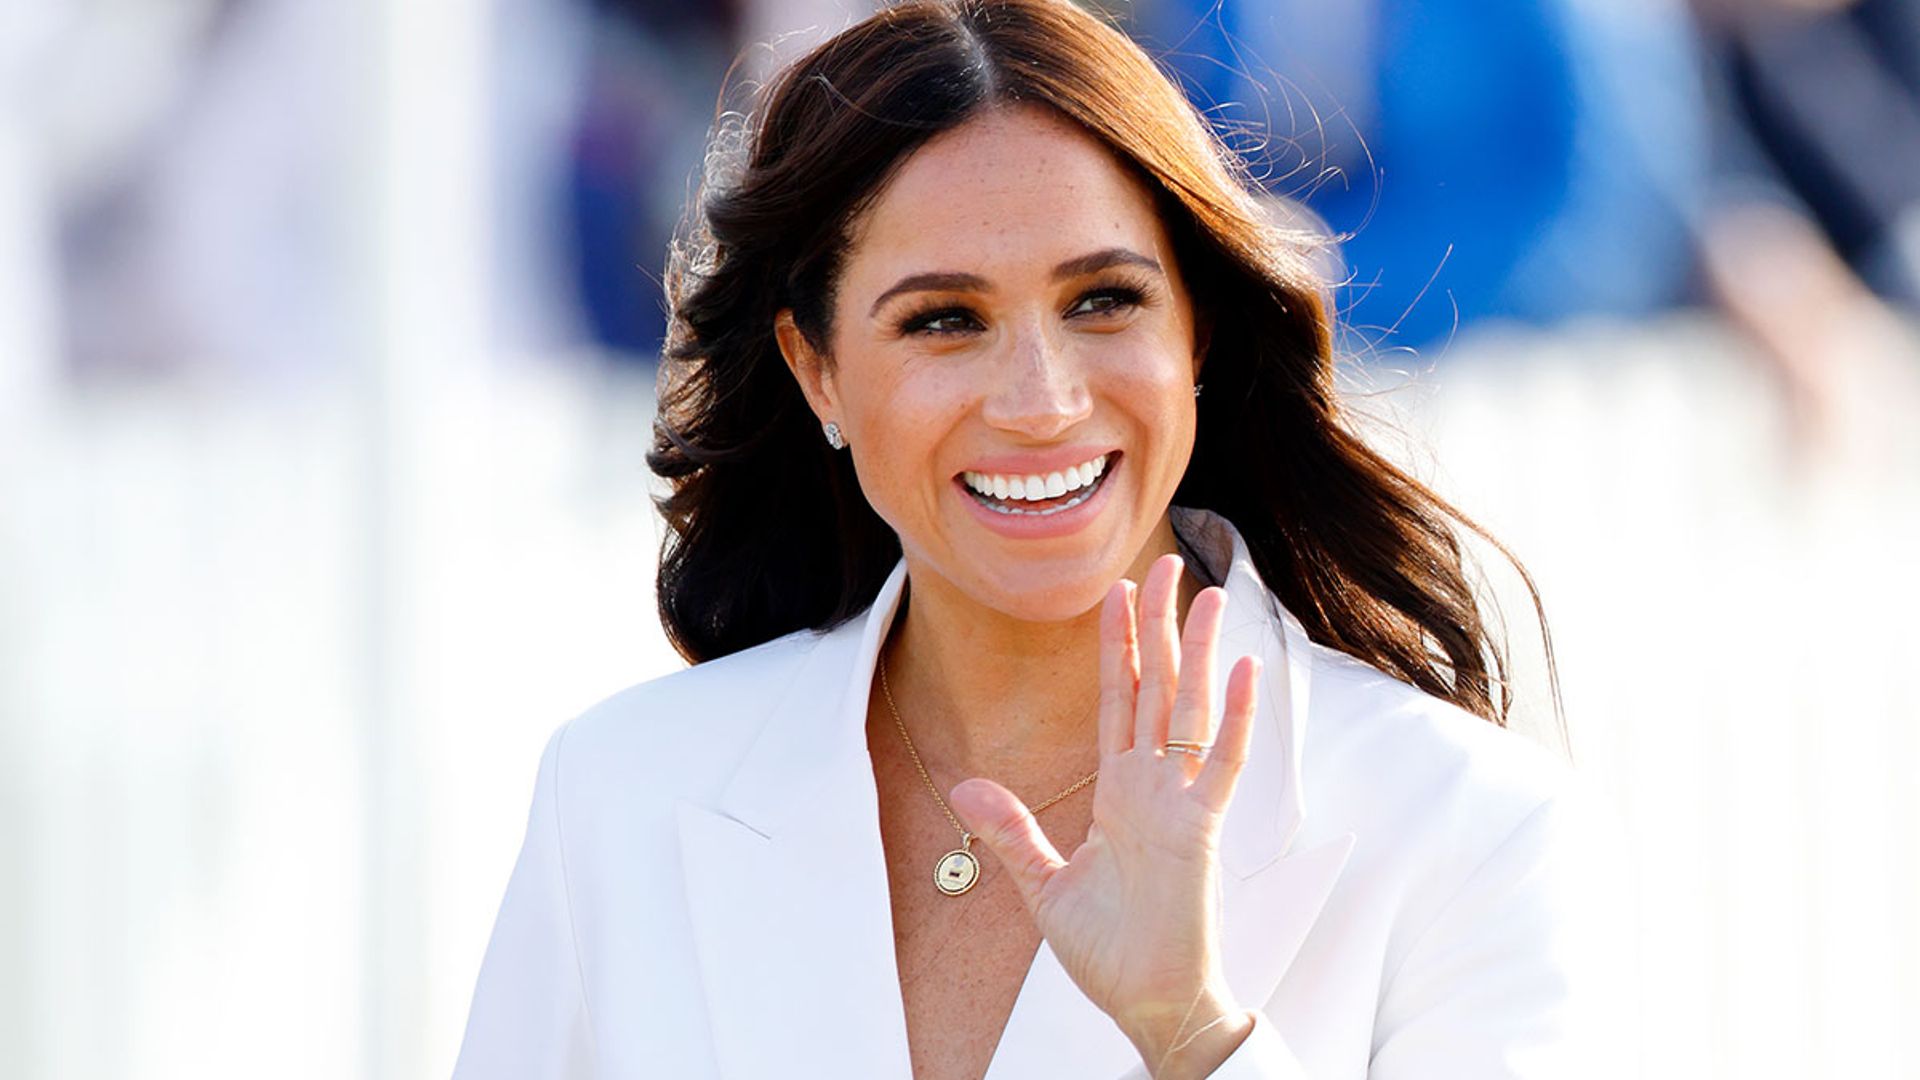 Meghan Markle wears a sustainably-made suit in NYC